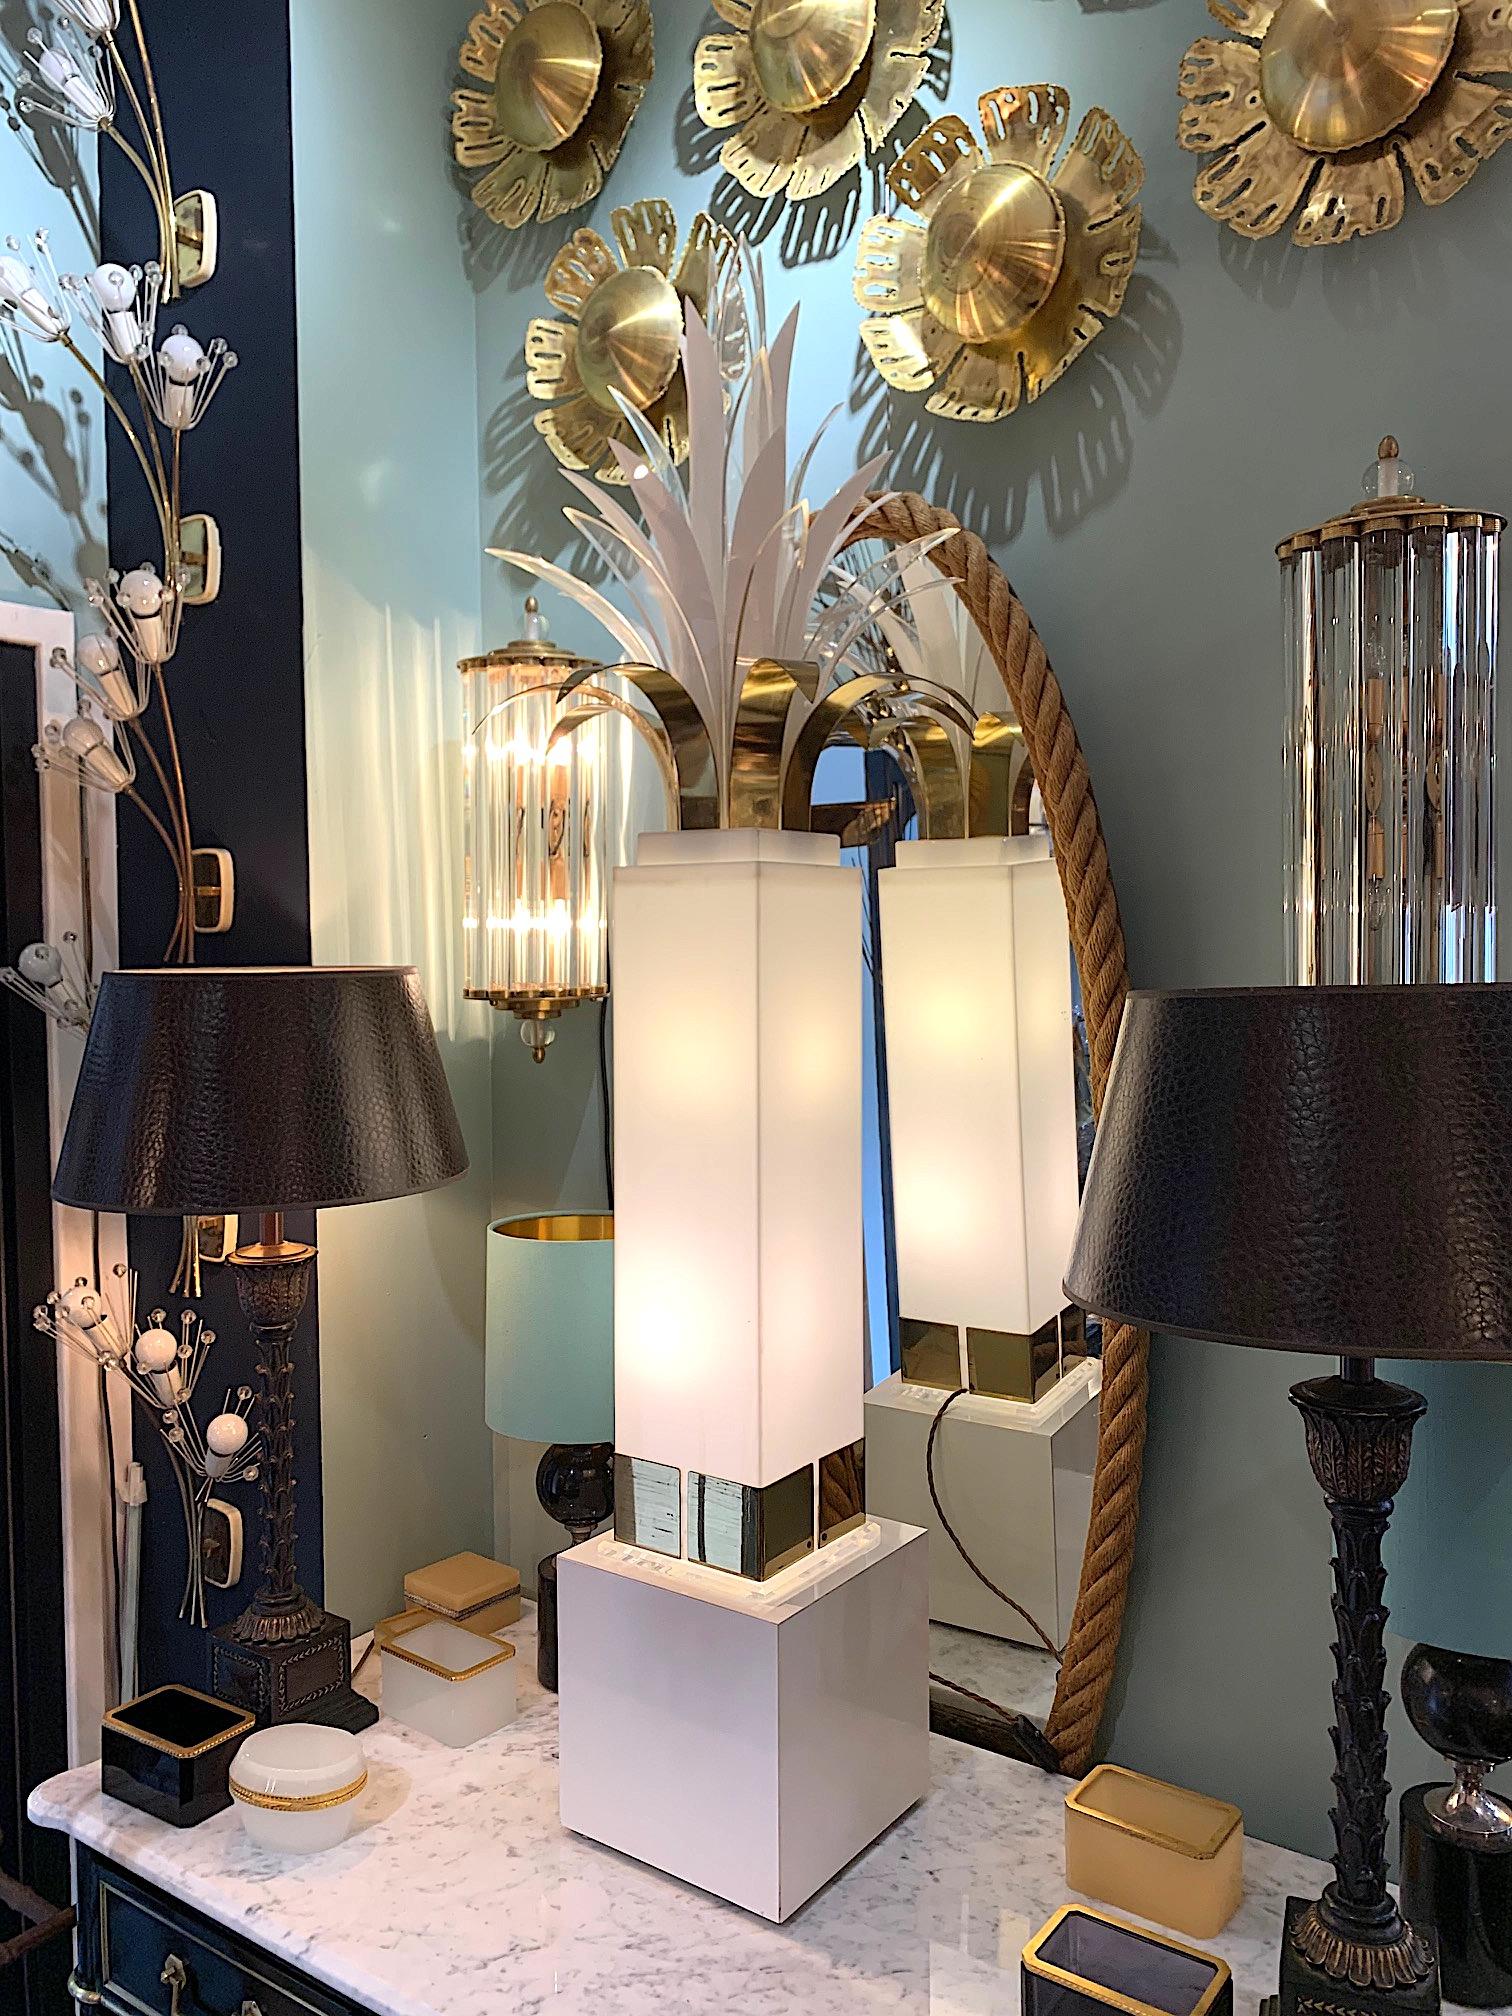 A rare stunning 1970s palm tree floor lamp by Peter Doff for Berger designs. The lamp is made of Lucite and brass with an opaque backlit stem which has 2 lights inside, mounted with brass and Lucite palm leaves on the top. The lights in the stem